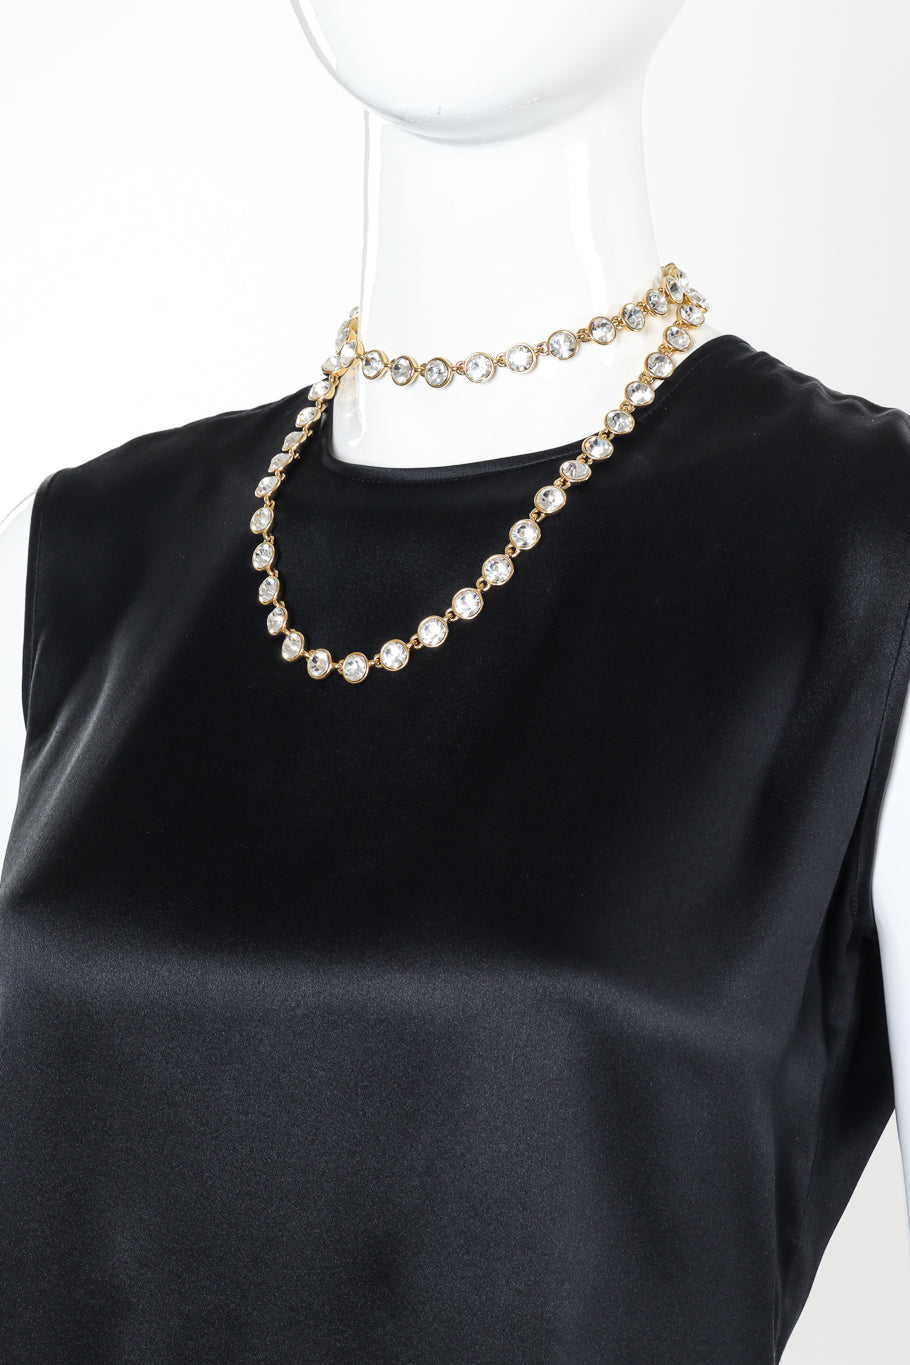 Vintage Givenchy Crystal Link Necklace front on mannequin looped twice @recessla